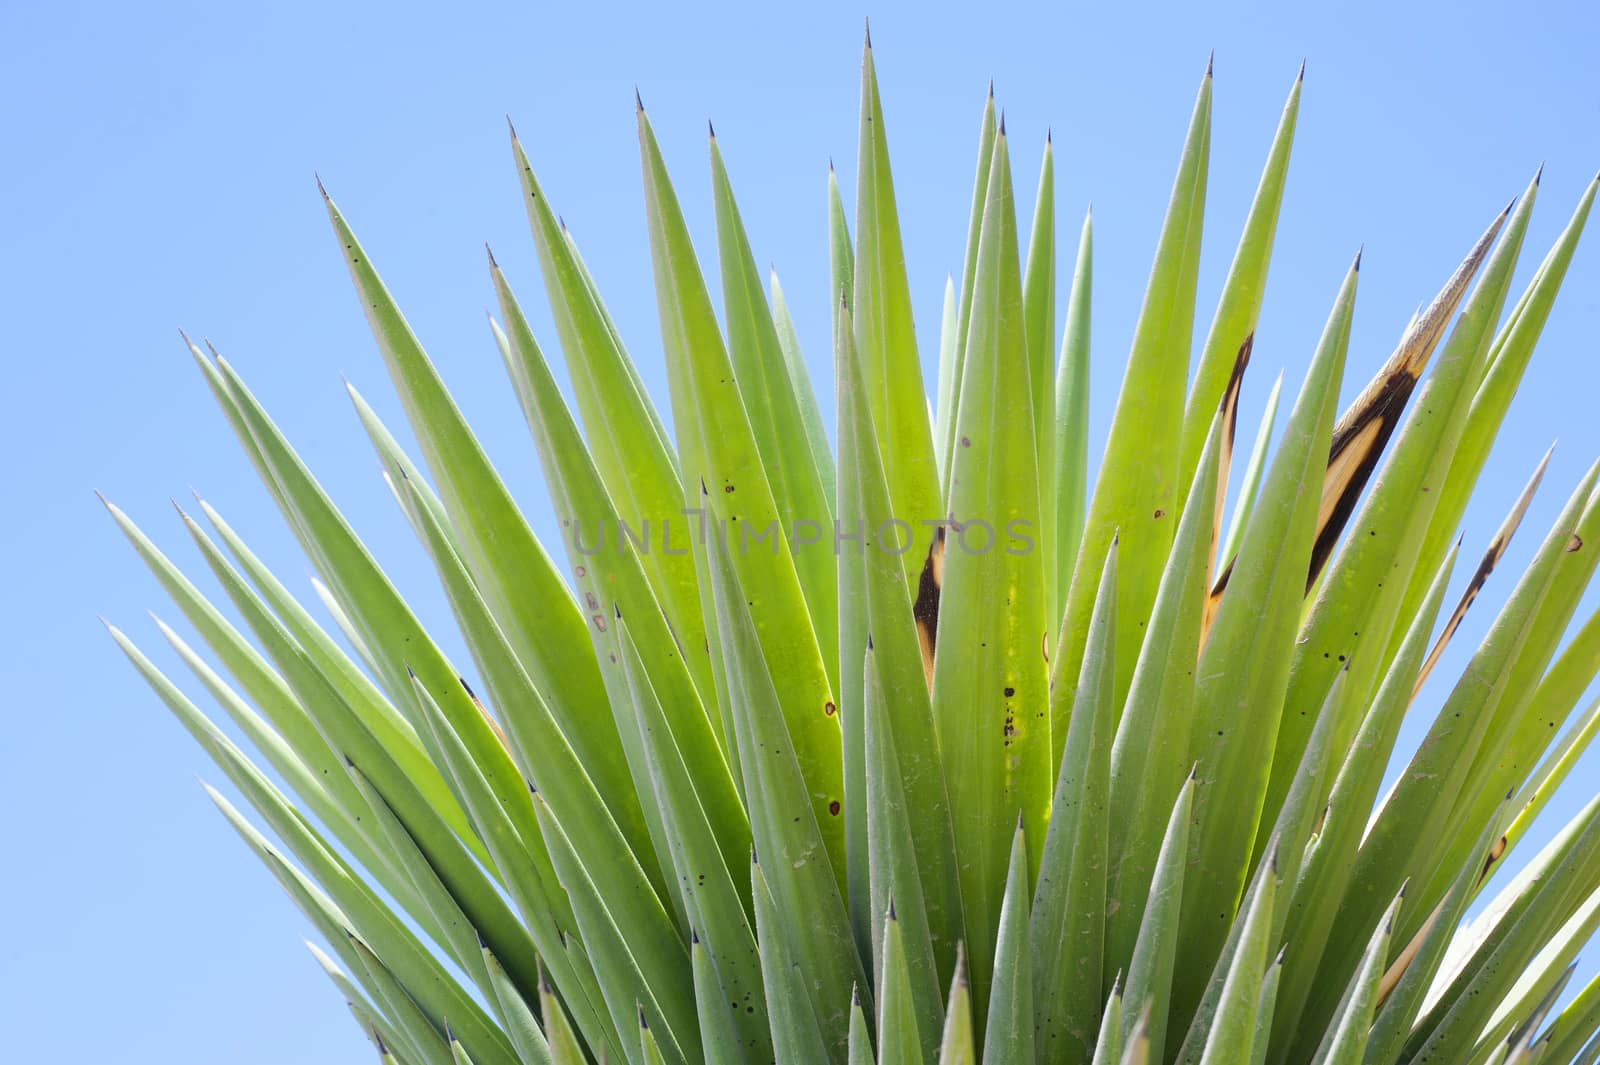 Tips of the leaves of a yukka plant against a blue sky background